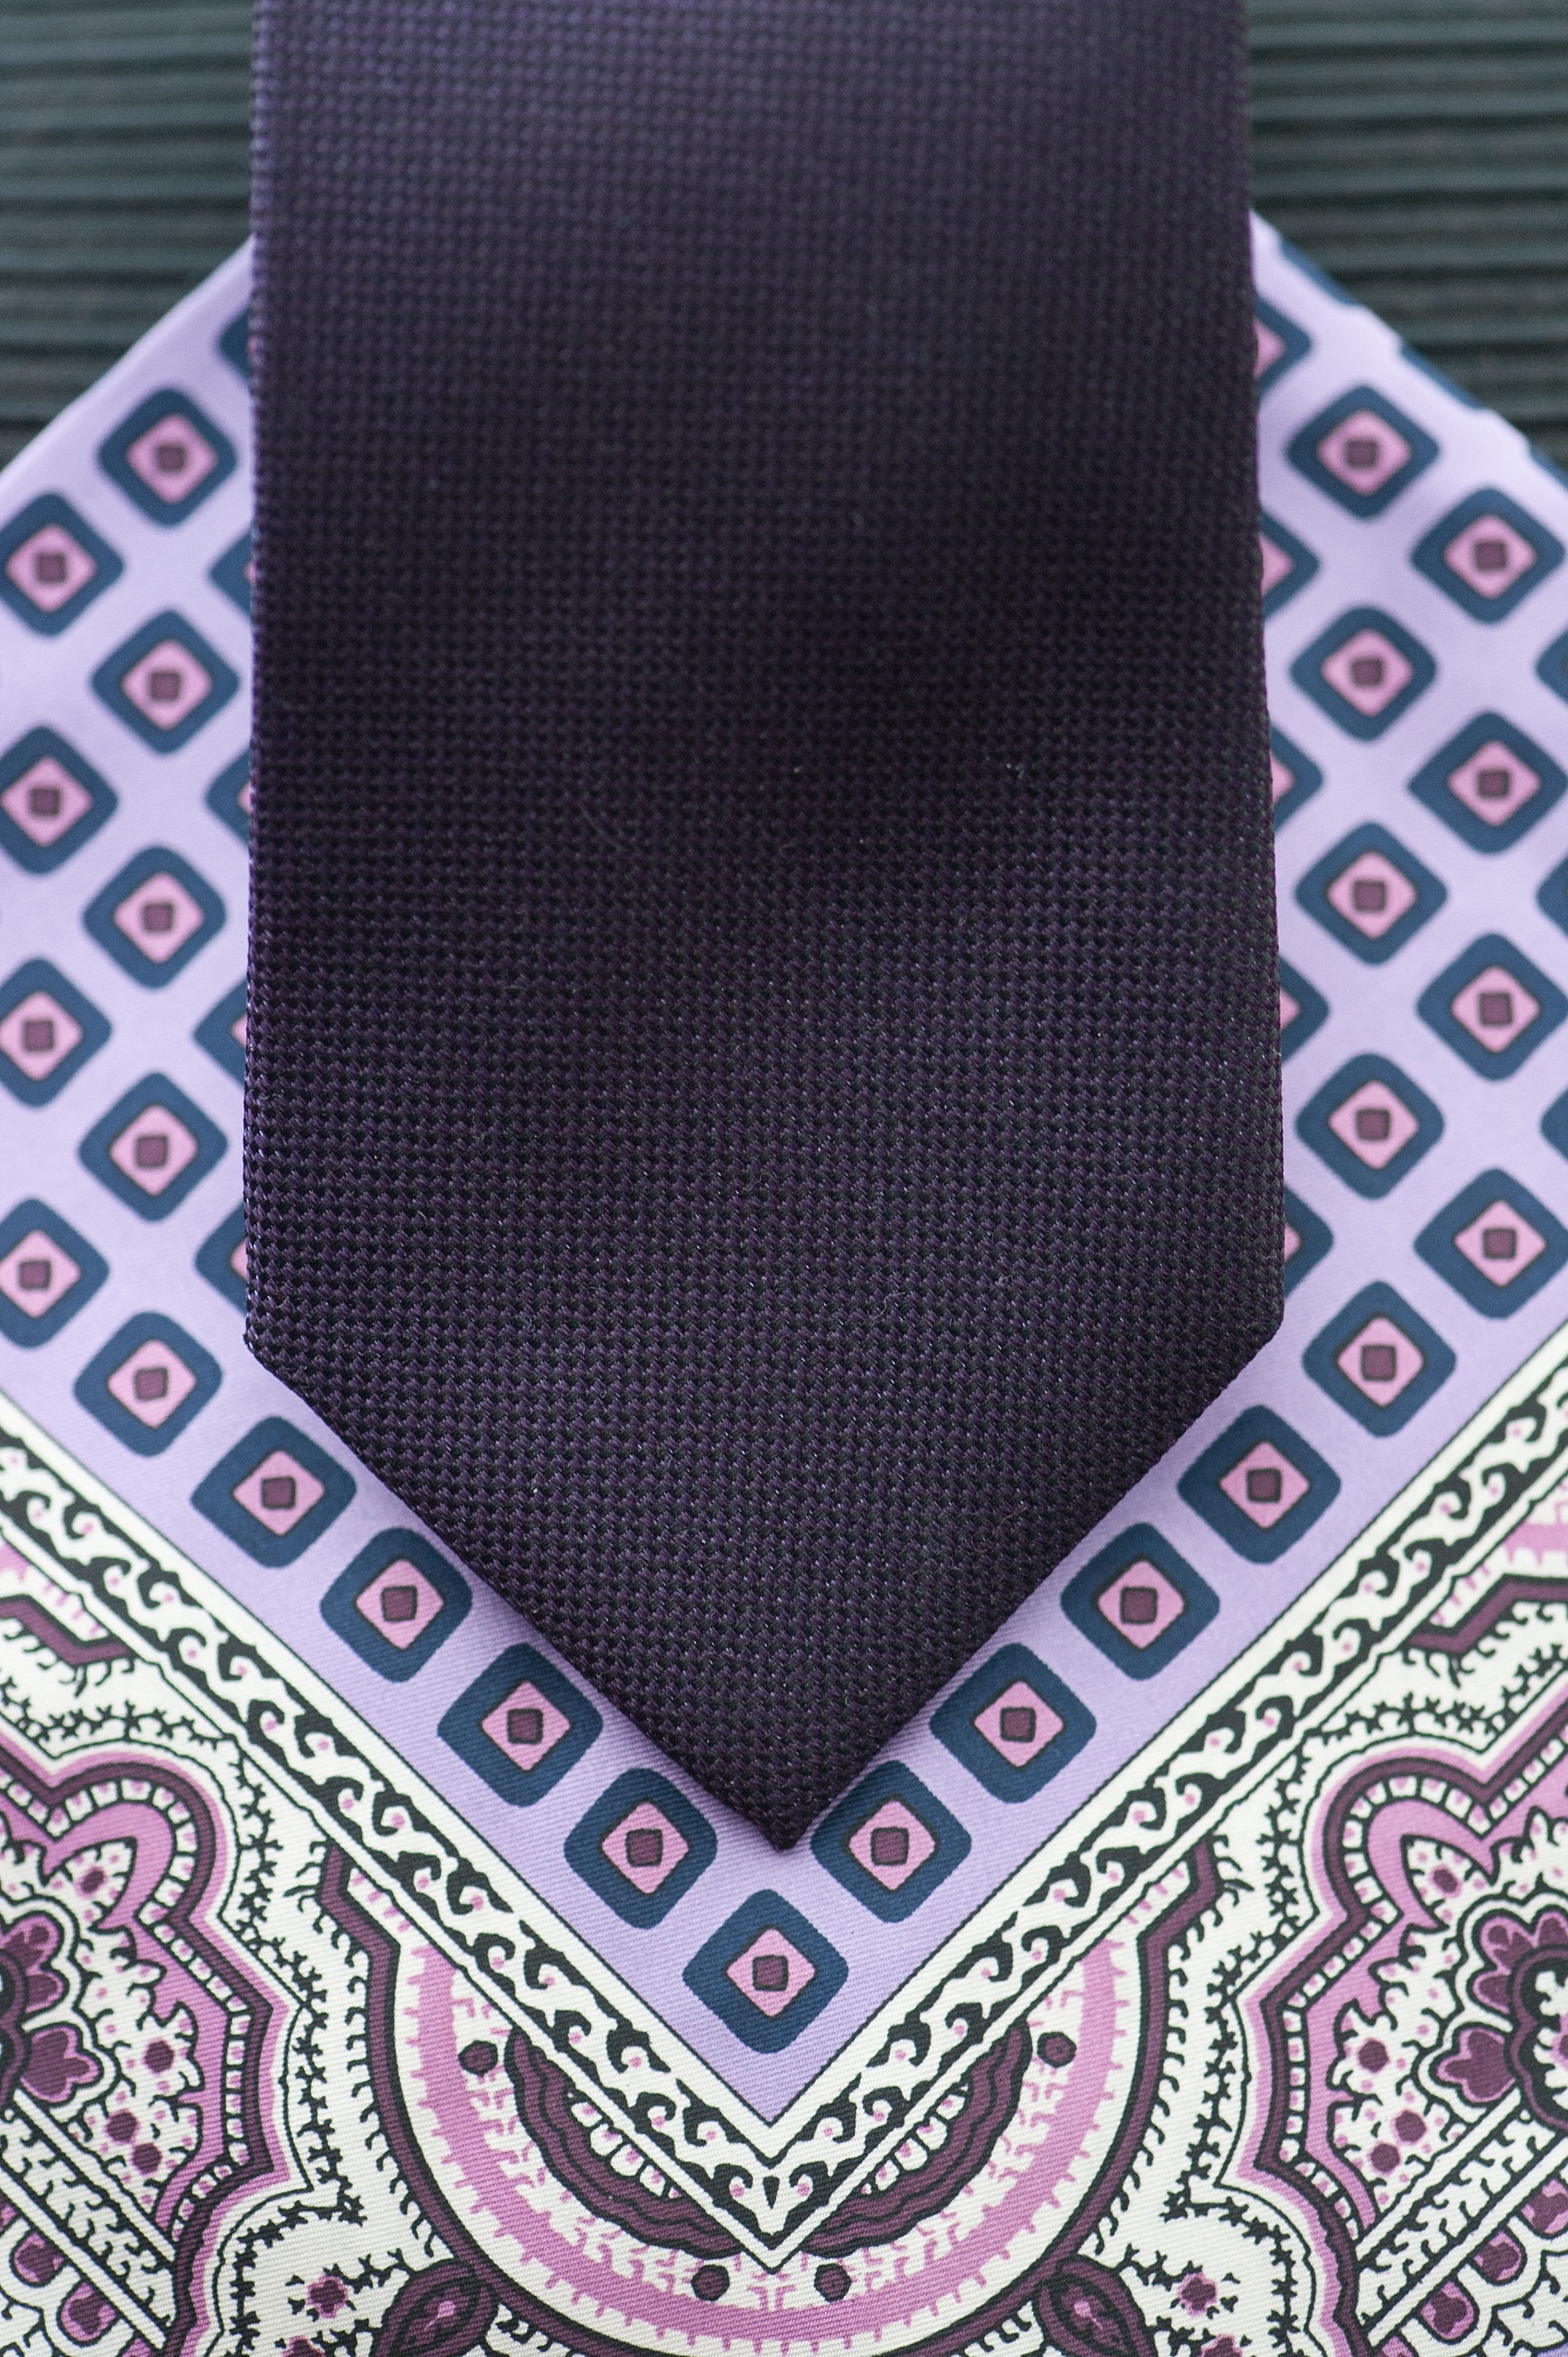 Mikkel Paige Photography Brooklyn Winery wedding photos. Detail picture of the groom's deep purple jewel-tone tie and paisley pattern lavender pocket square.